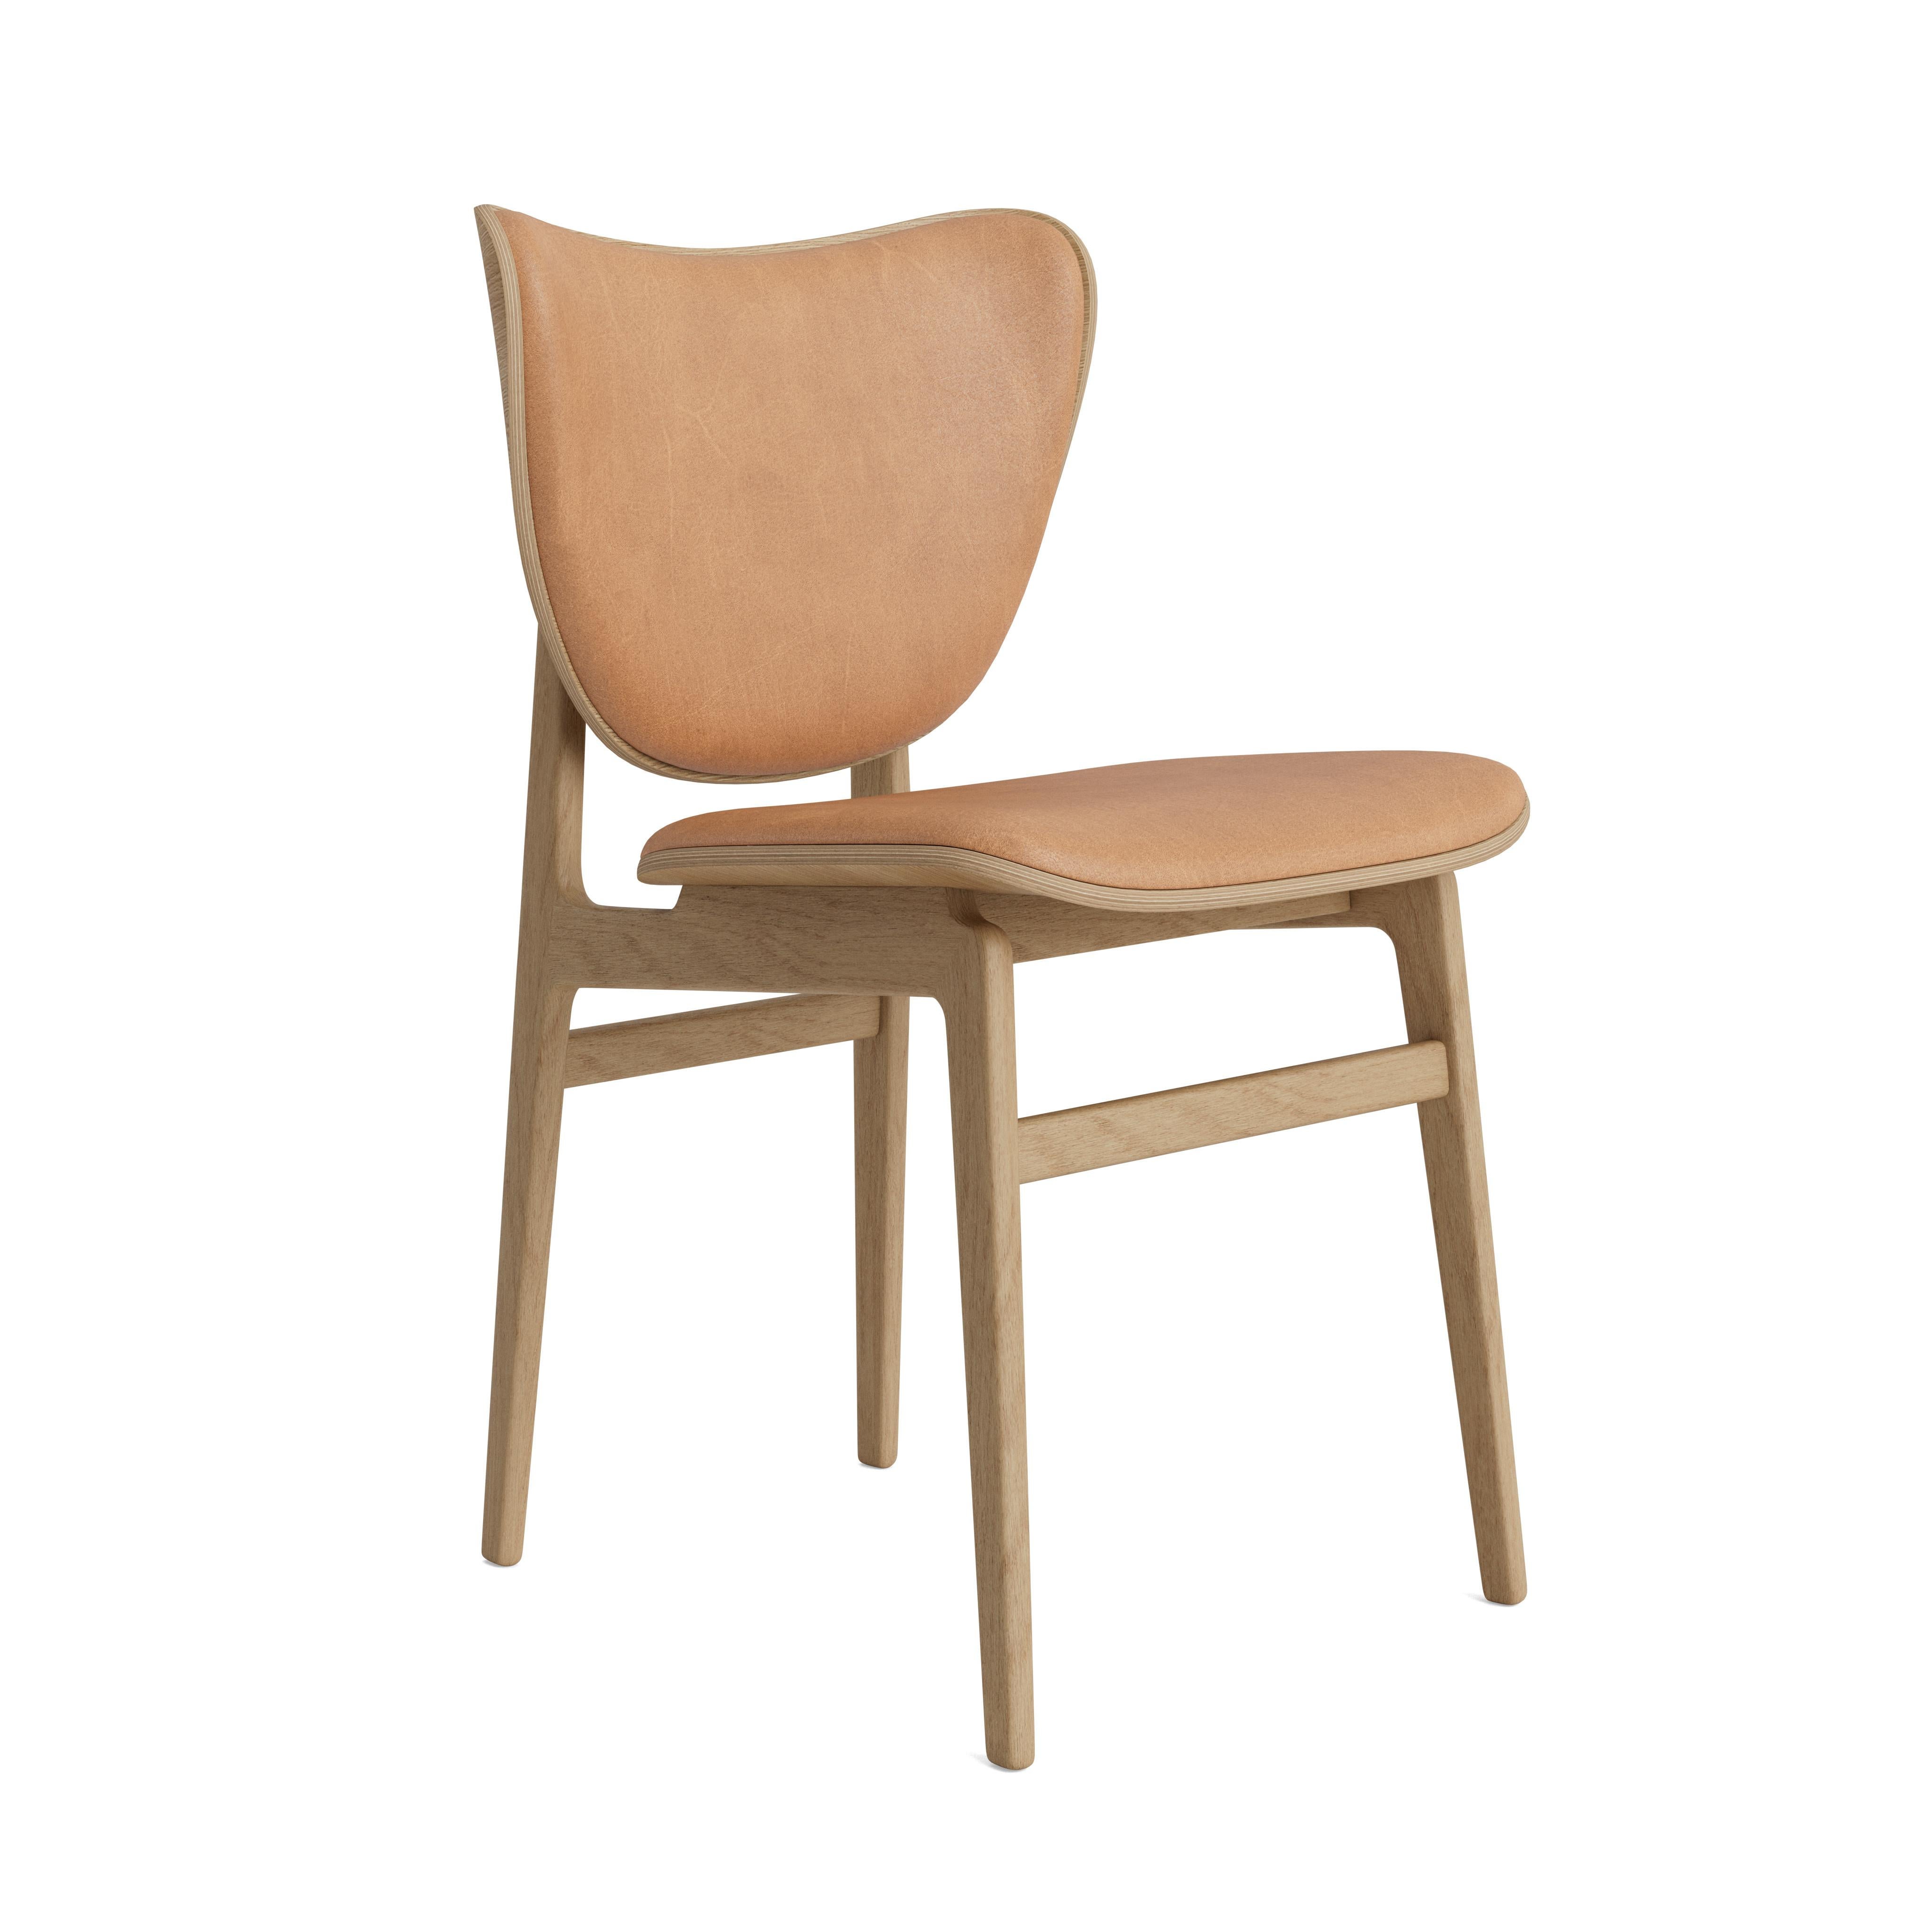 Elephant Dining Chair by NORR11
Dimensions: D 51 x W 47 x H 80,5 cm. SH 45,5 cm.
Materials: Natural oak and upholstery.
Upholstery: Dunes Camel 21004.

Available in different oak finishes: Natural oak, light smoked oak, dark smoked oak, black oak.